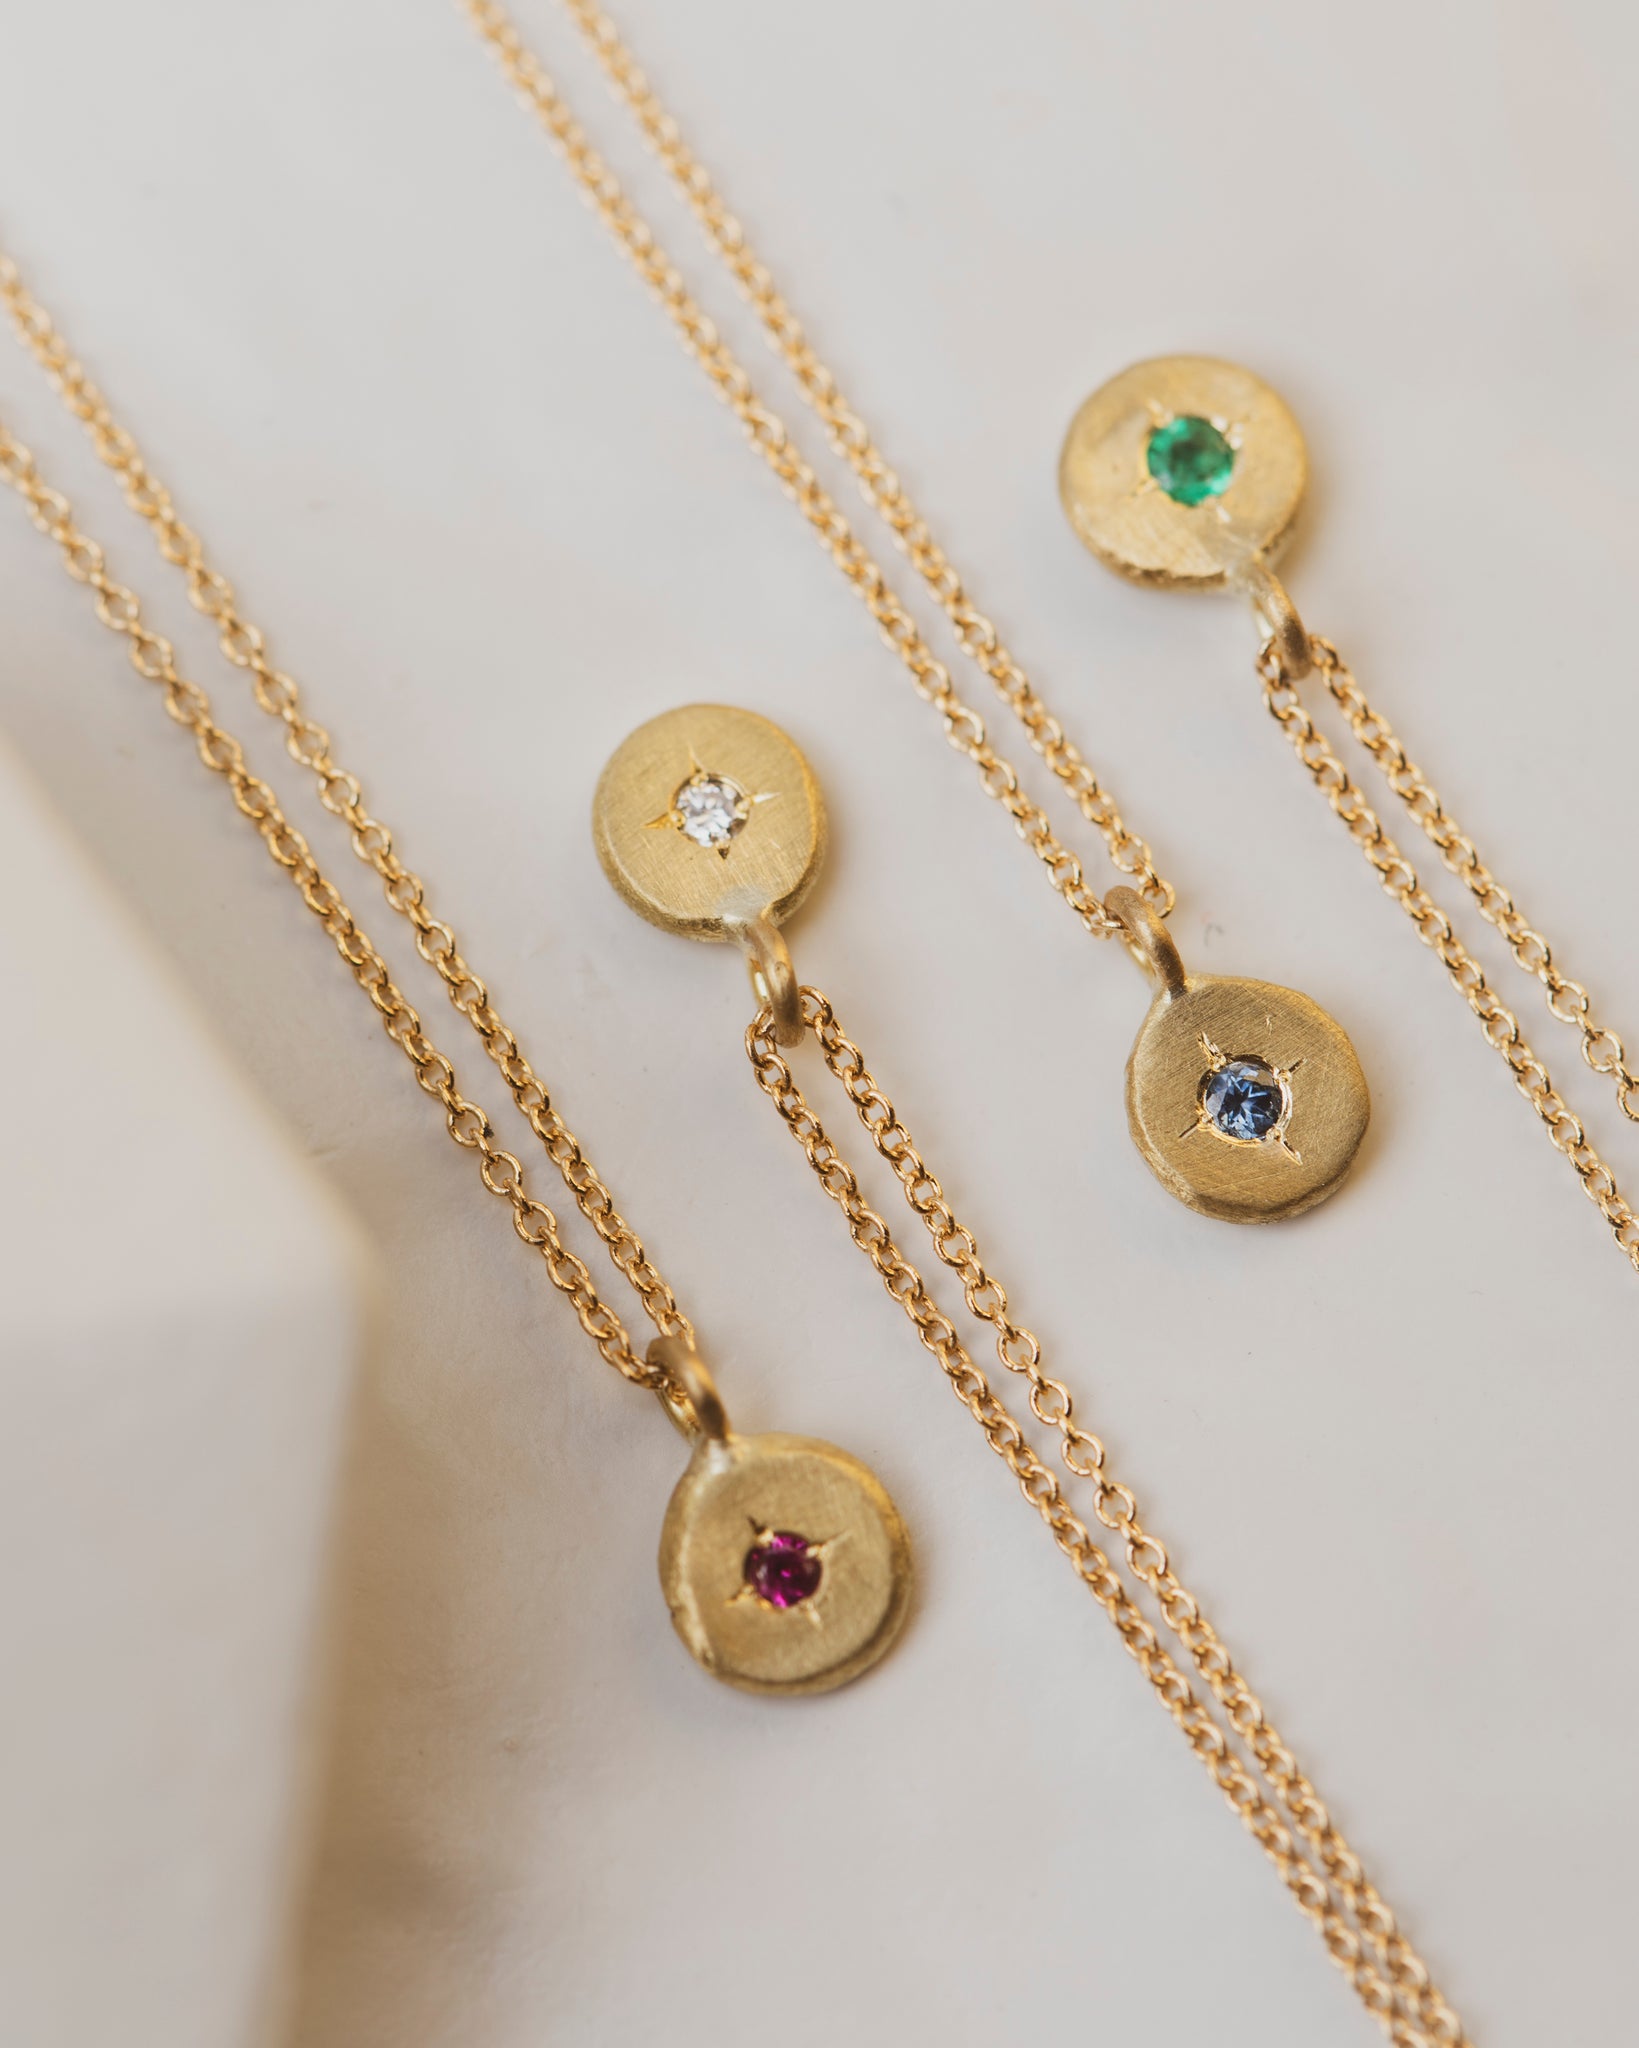 18K yellow gold pebble gemstone necklaces with a diamond, sapphire, emerald or ruby in the center. 5mm round with 2mm gemstone